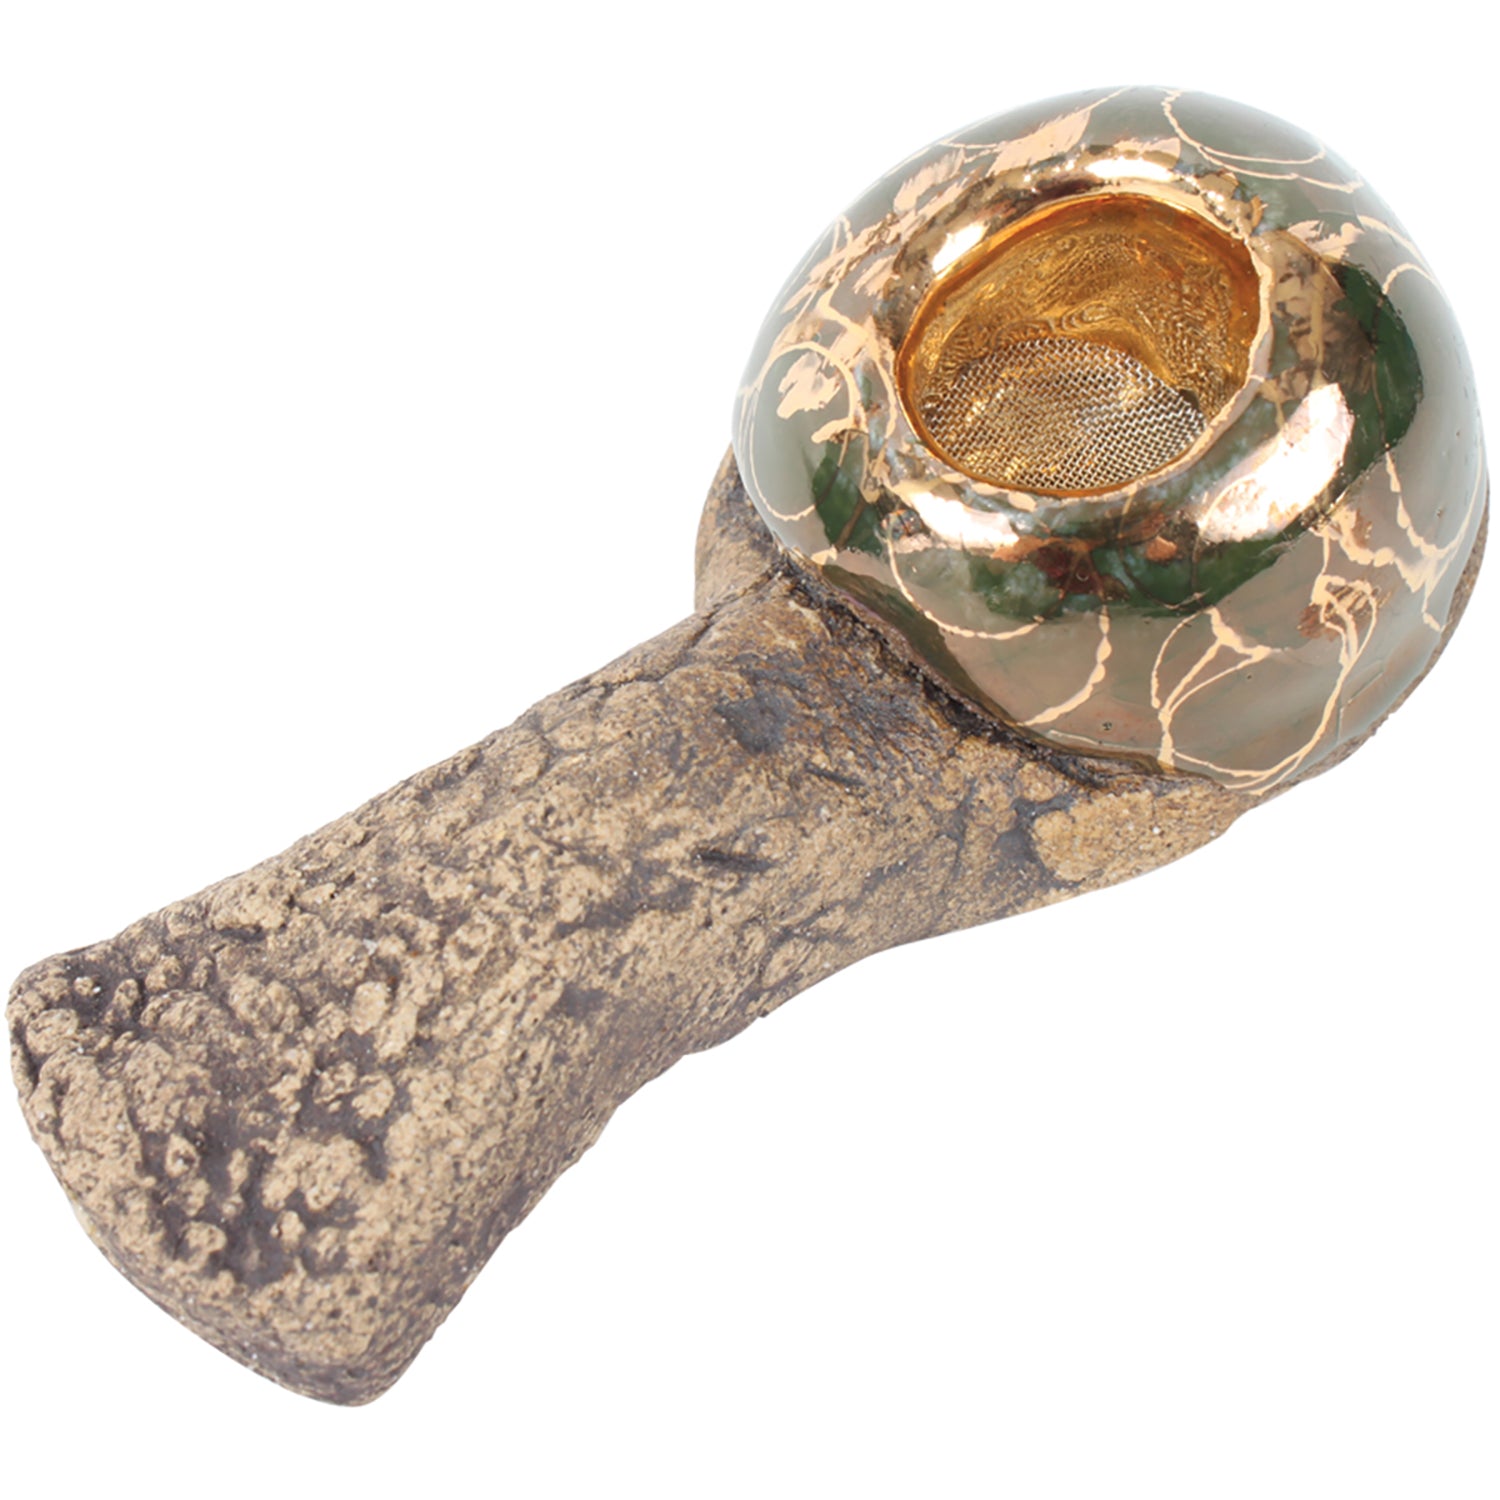 2 Pipes   4oz Kleen Green Gold - Celebration Pipes